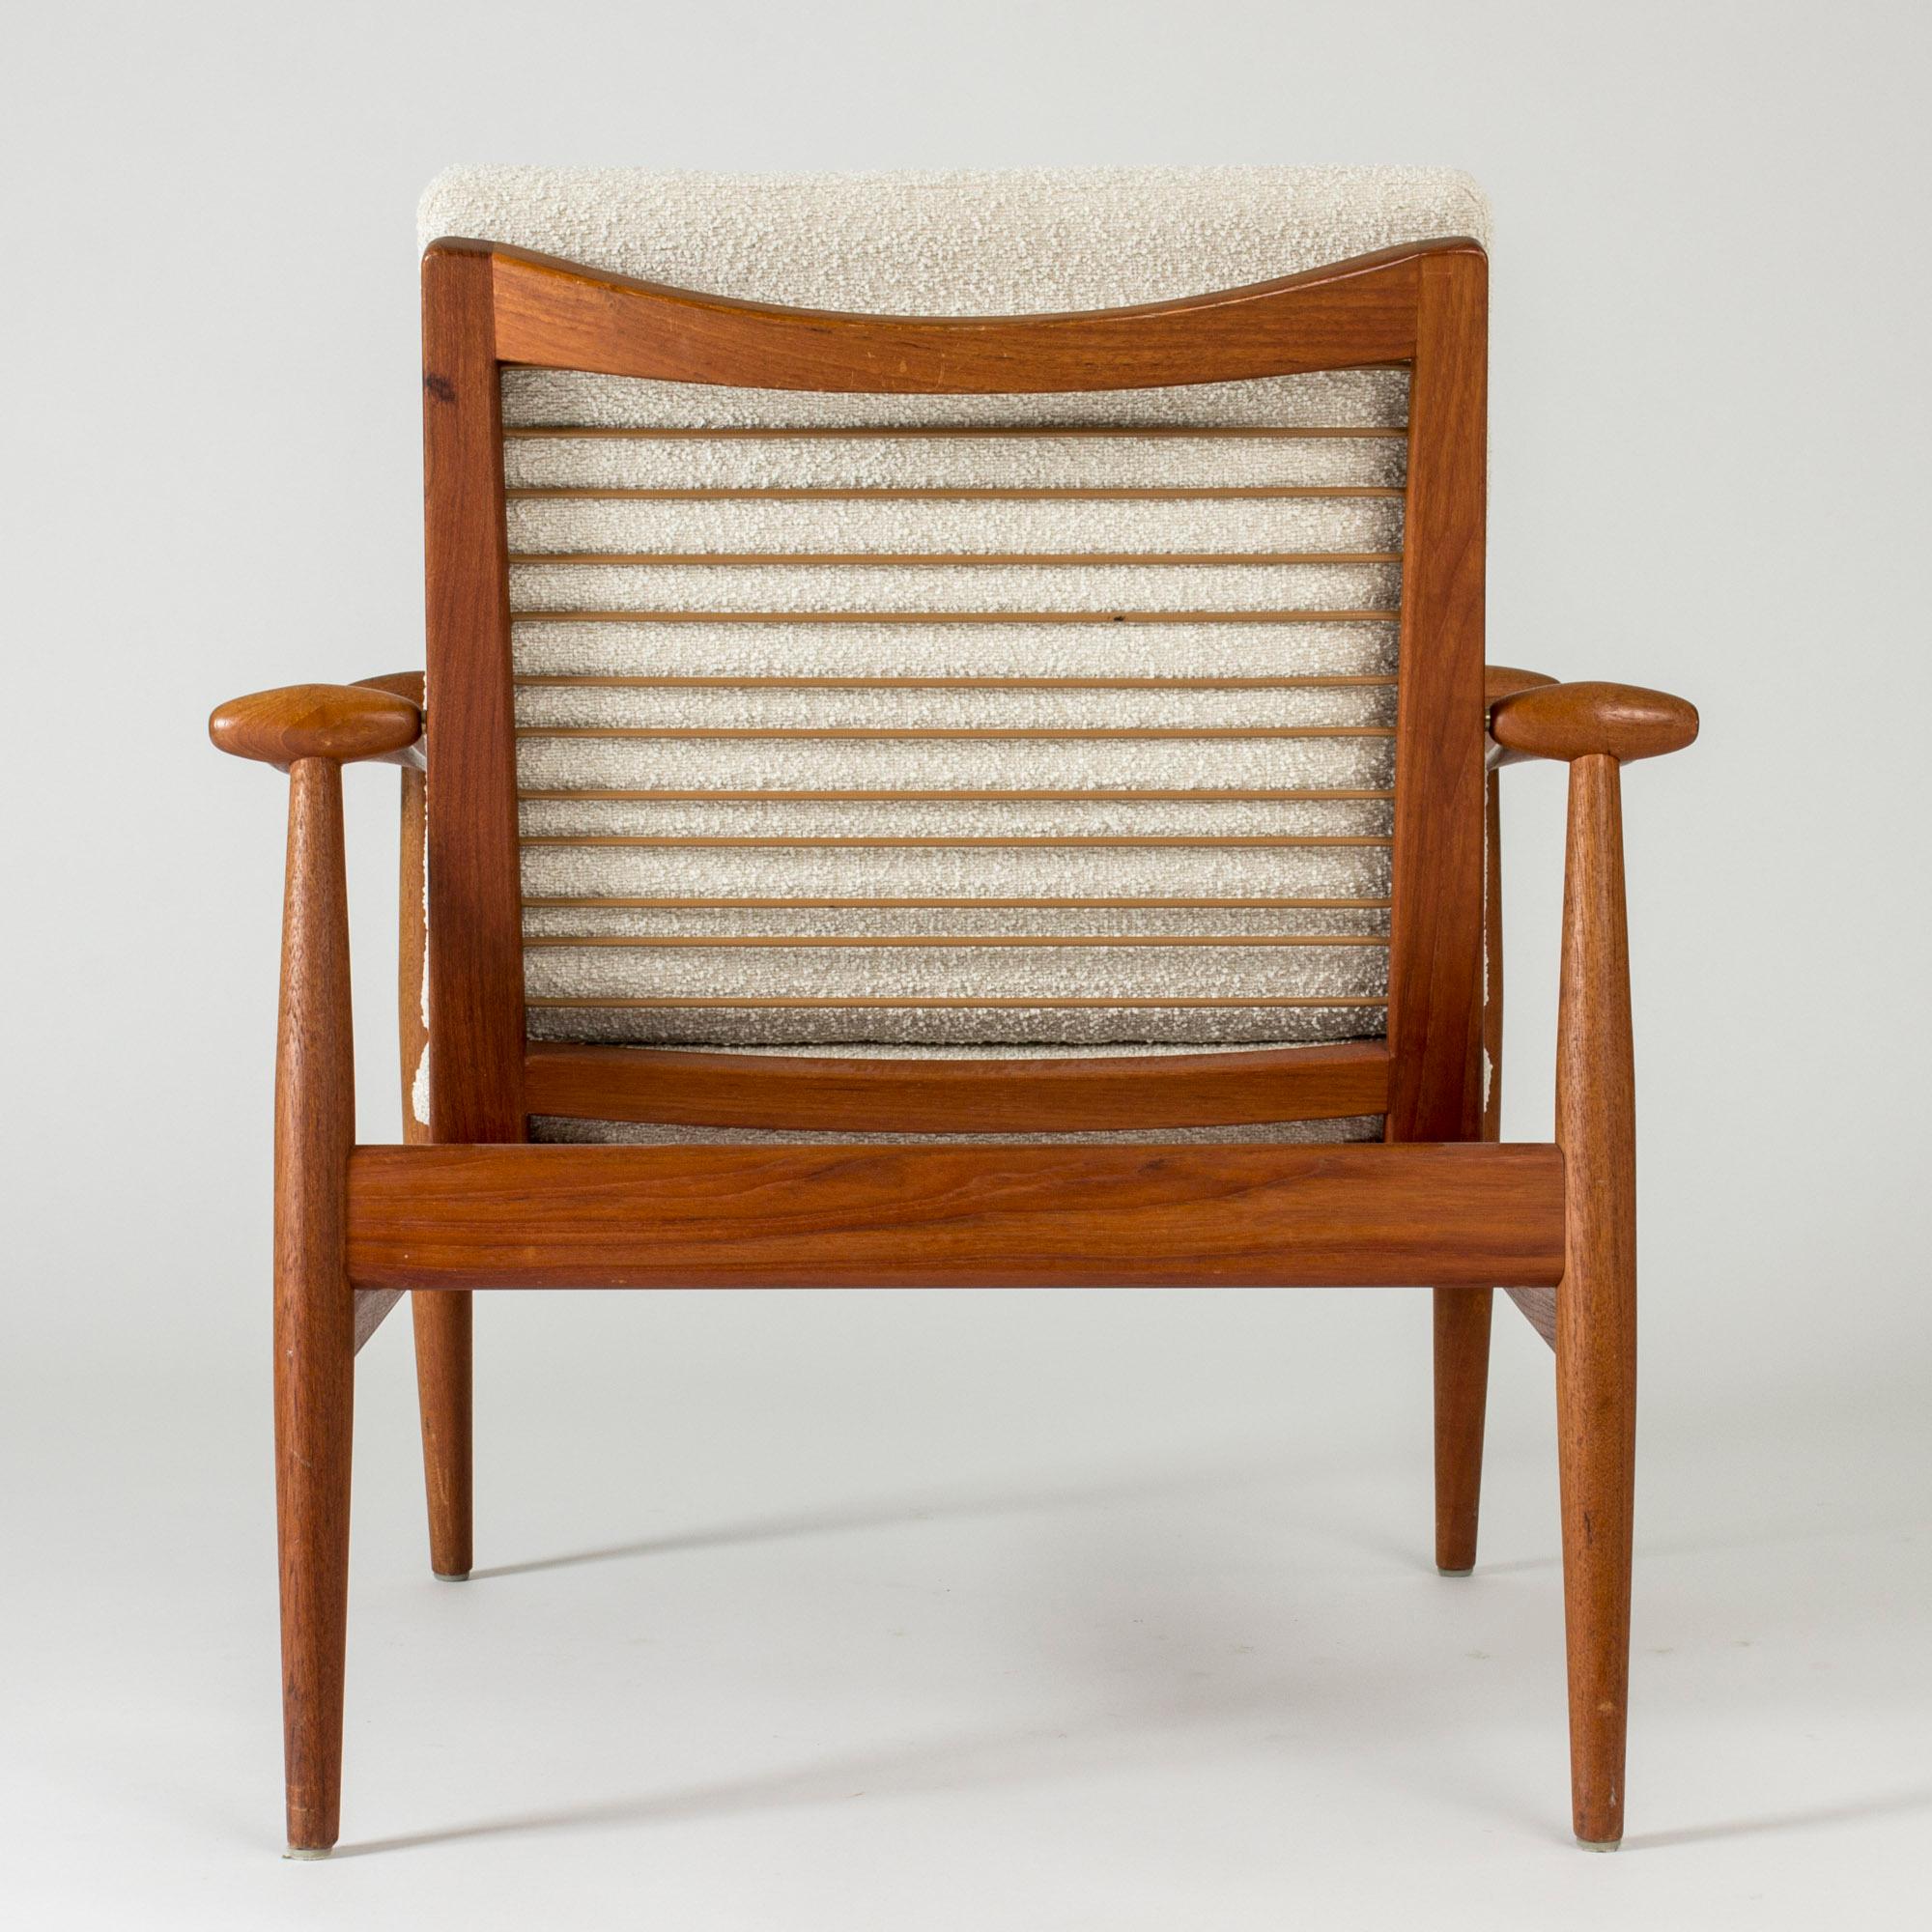 Mid-20th Century Pair of “Spade” Lounge Chairs by Finn Juhl